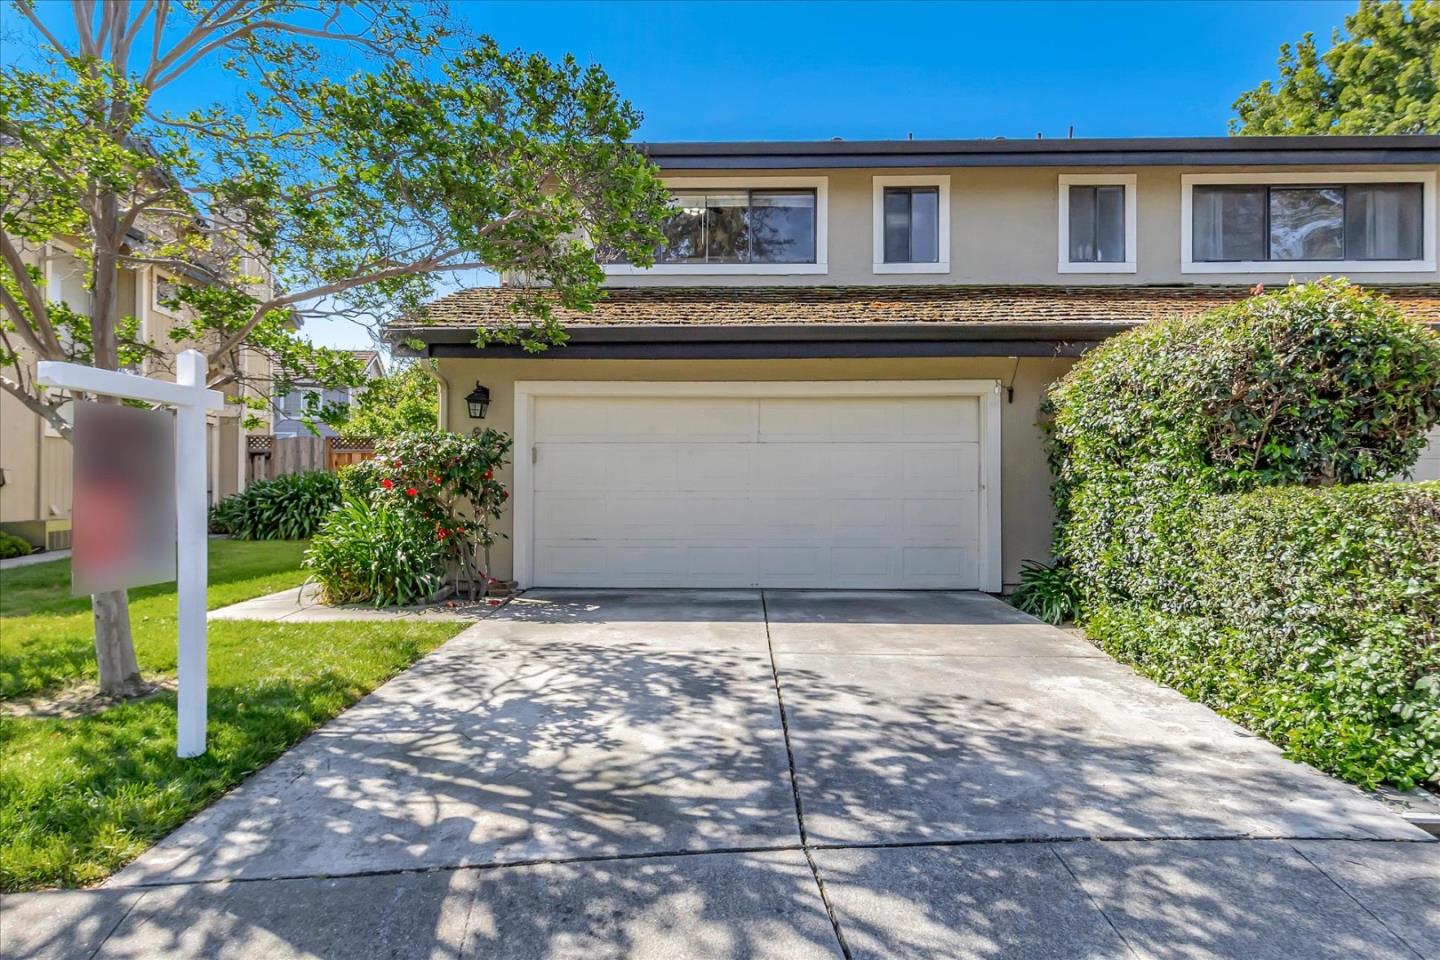 Photo of 24 Jacklin Pl in Milpitas, CA